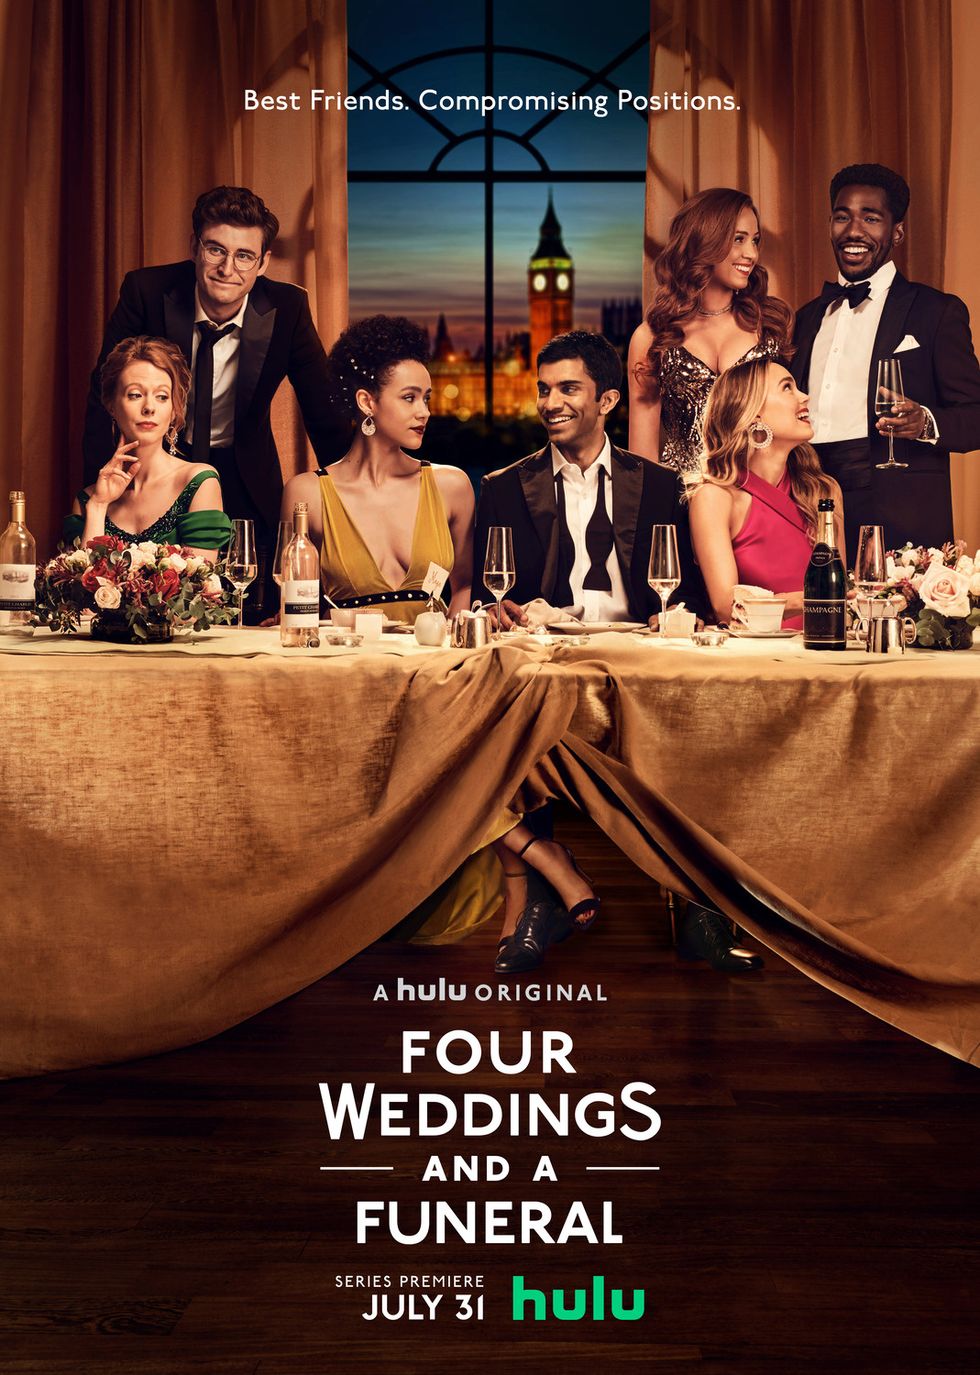 Hulu Series "Four Weddings And A Funeral": Review